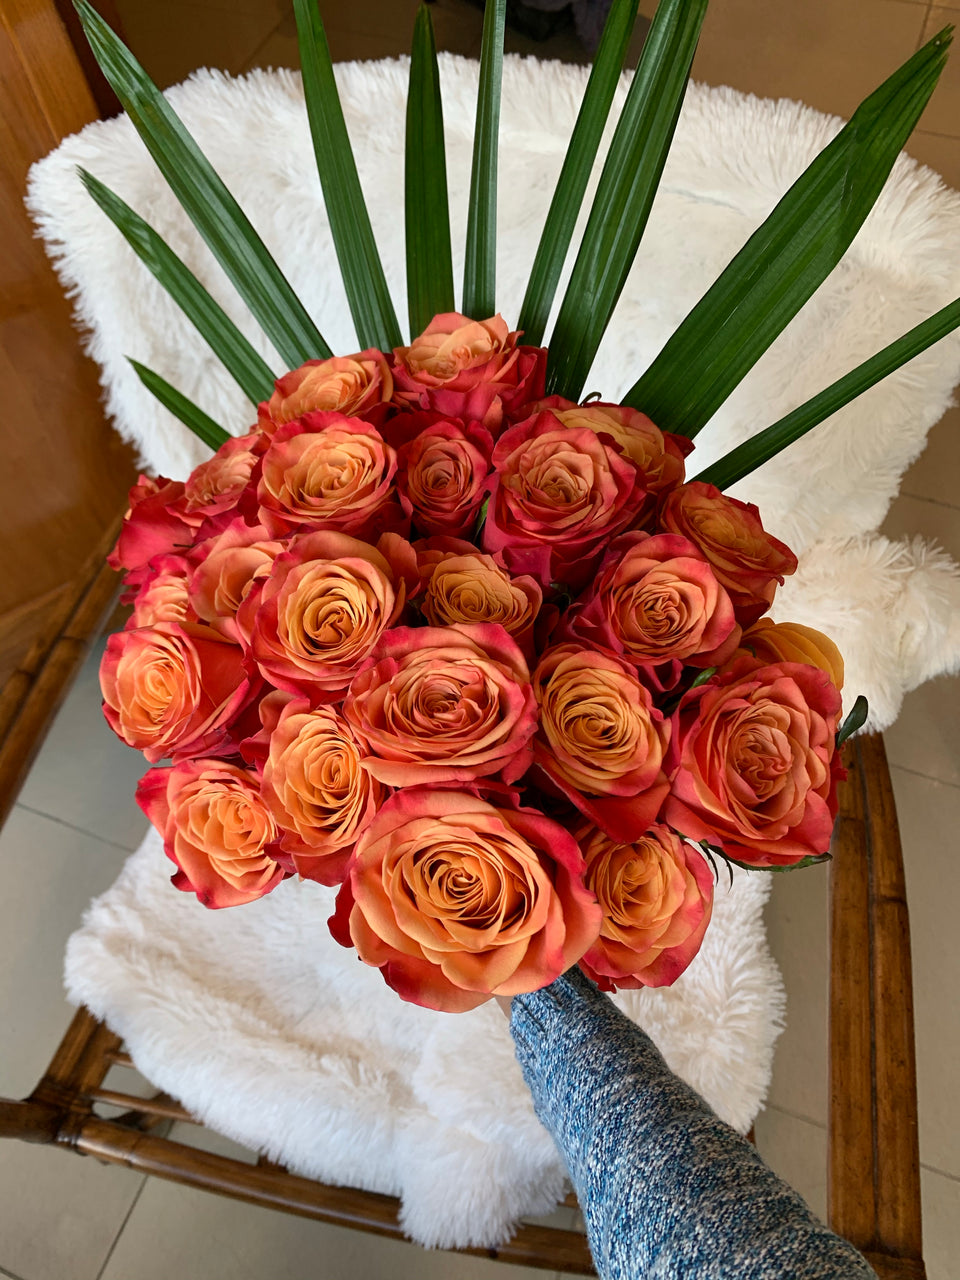 Hand holding orange roses with large green leaves